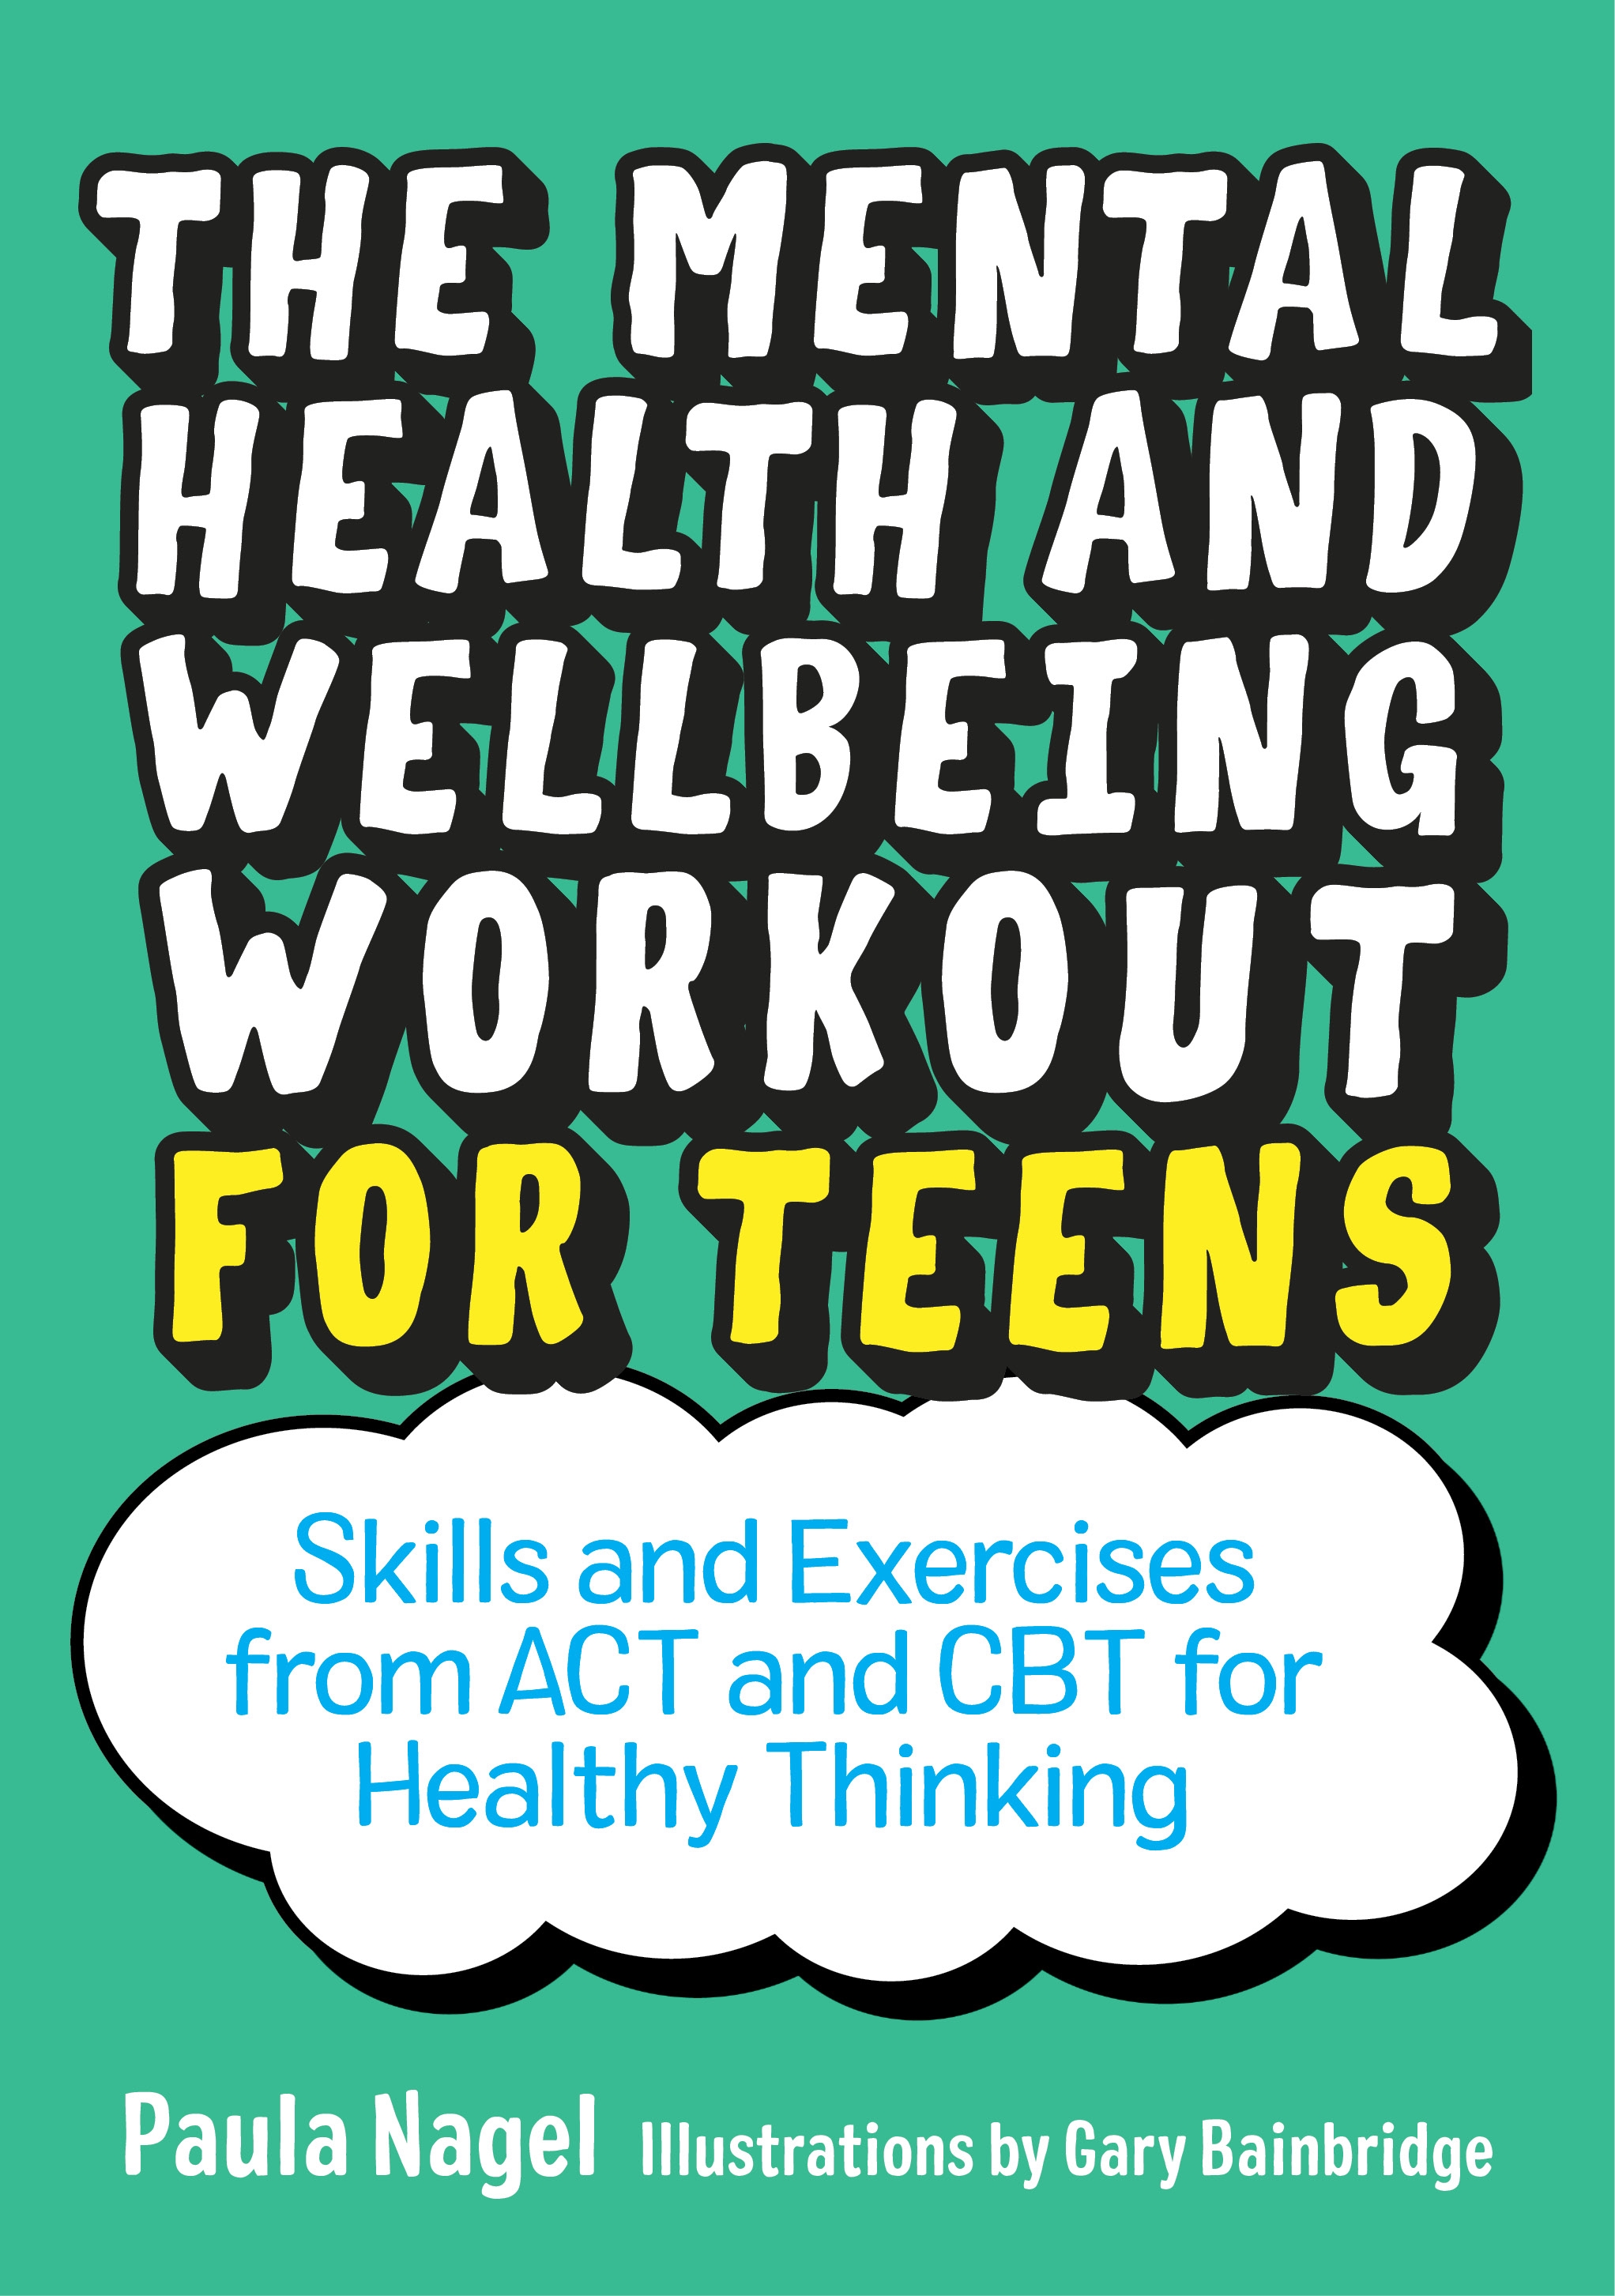 The Mental Health and Wellbeing Workout for Teens